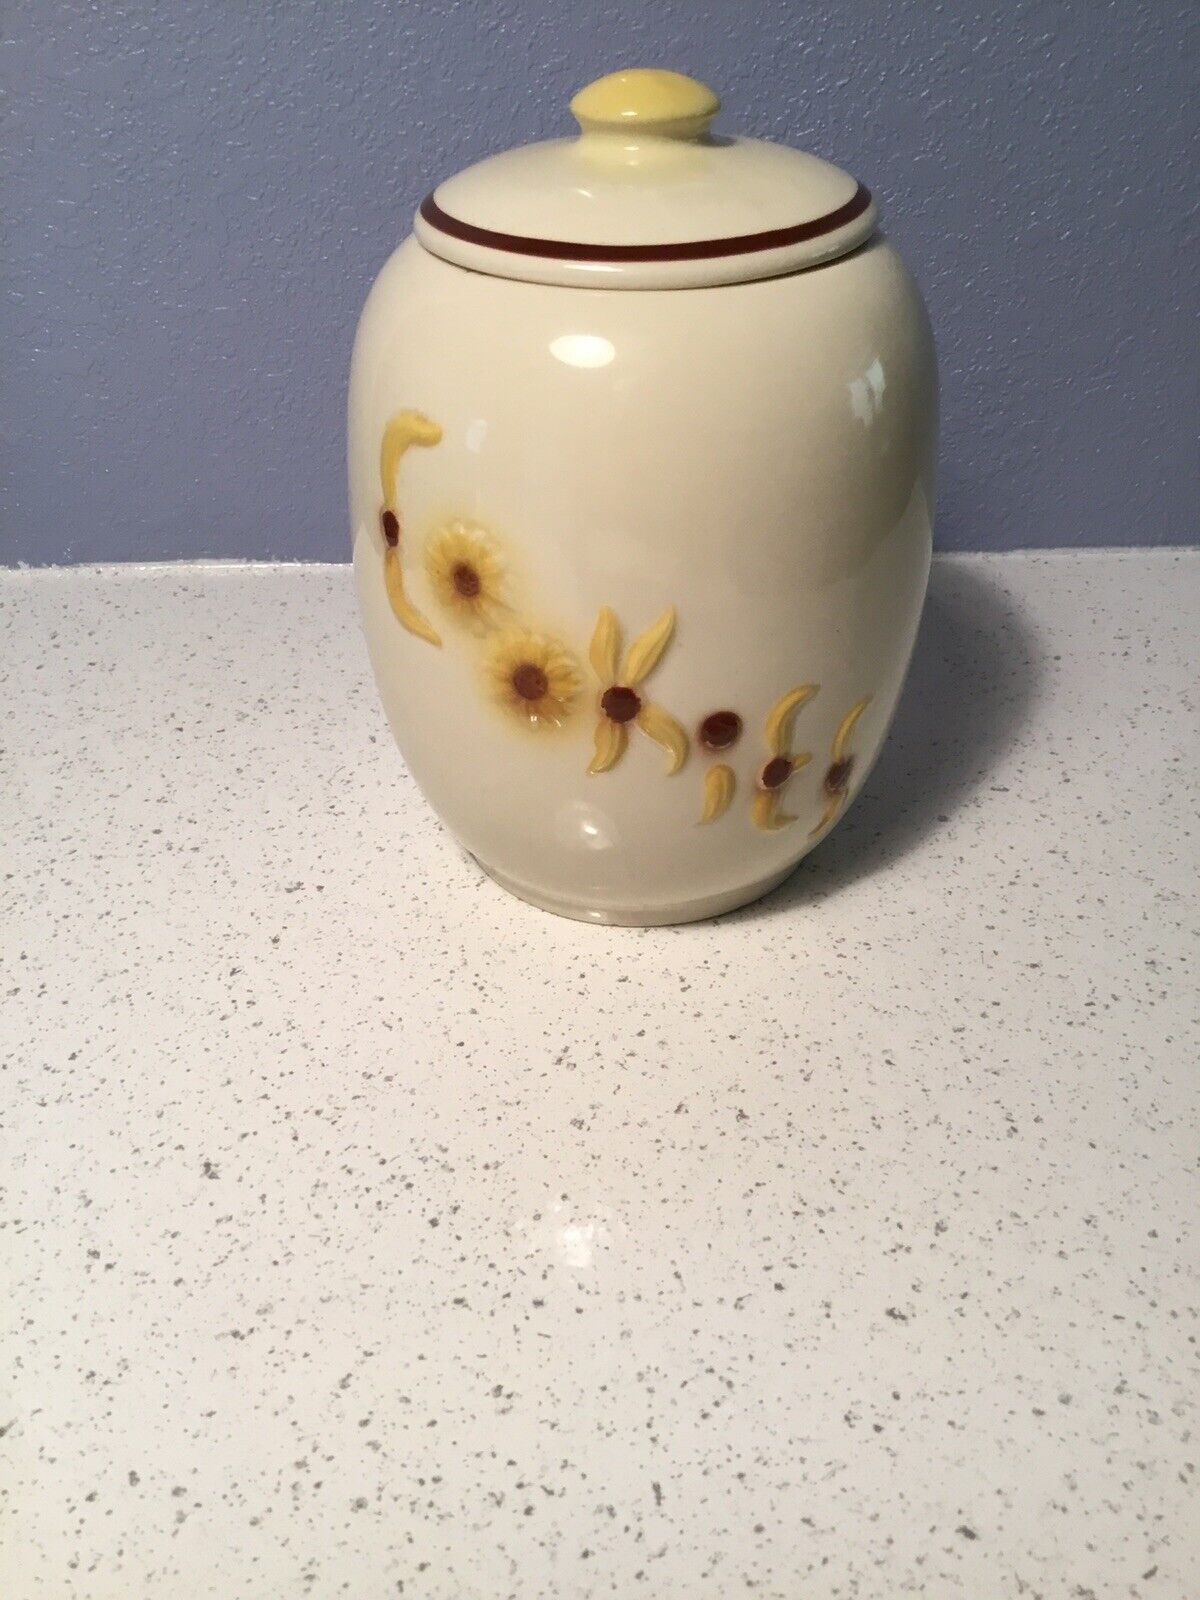 Hull Pottery Daisy Floral Cookie Jar with Lid No. 48 Vintage USA 50s